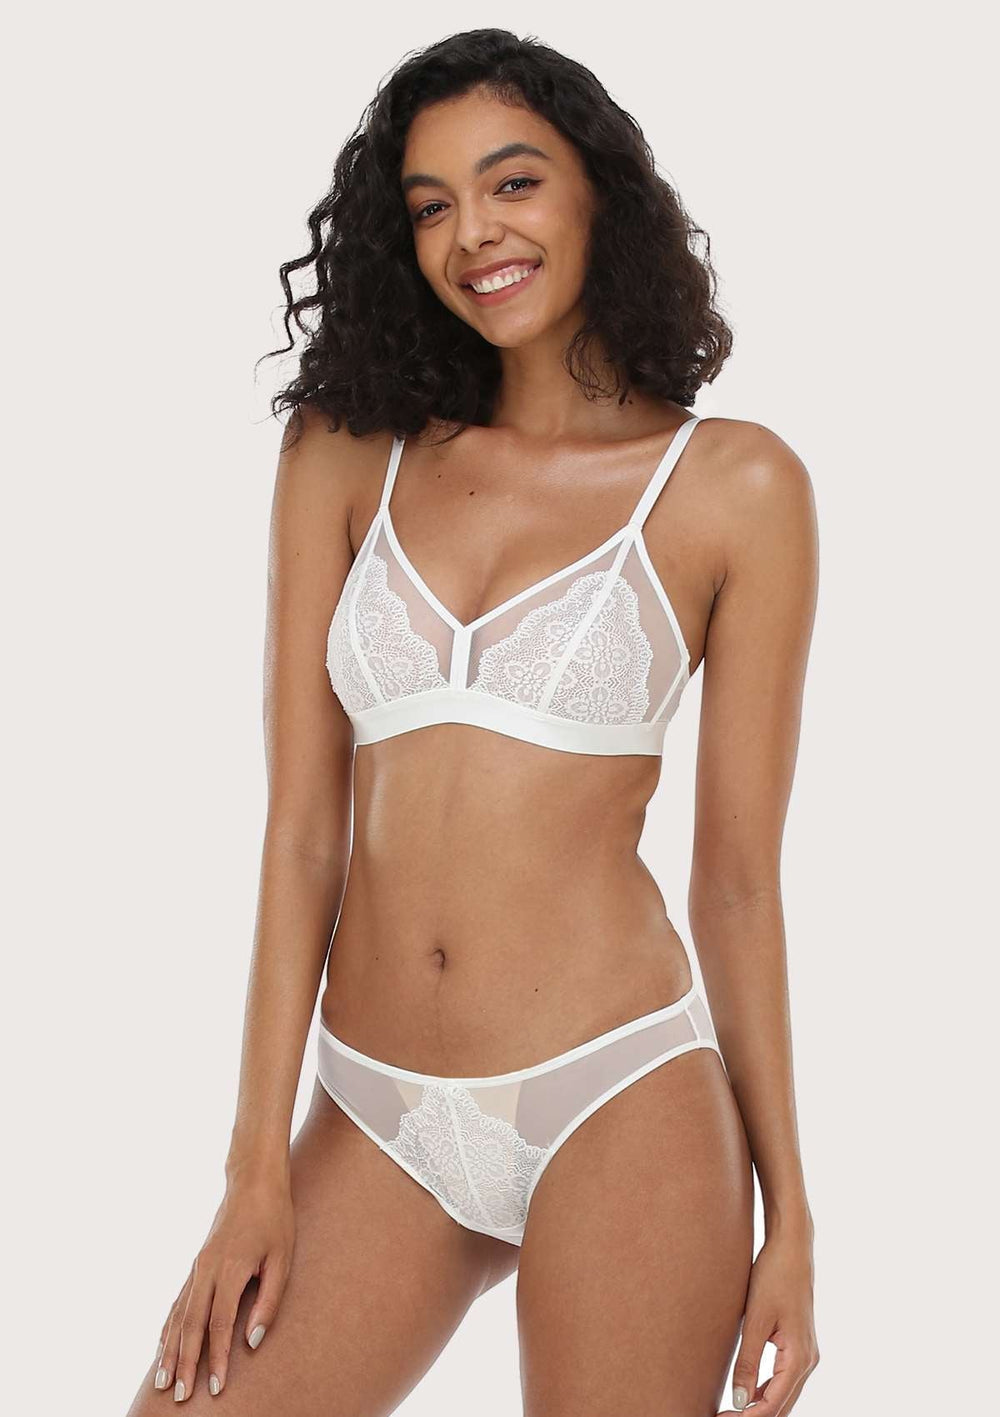 Unlined Bras: Wireless, Lace, Sheer With Matching Panties